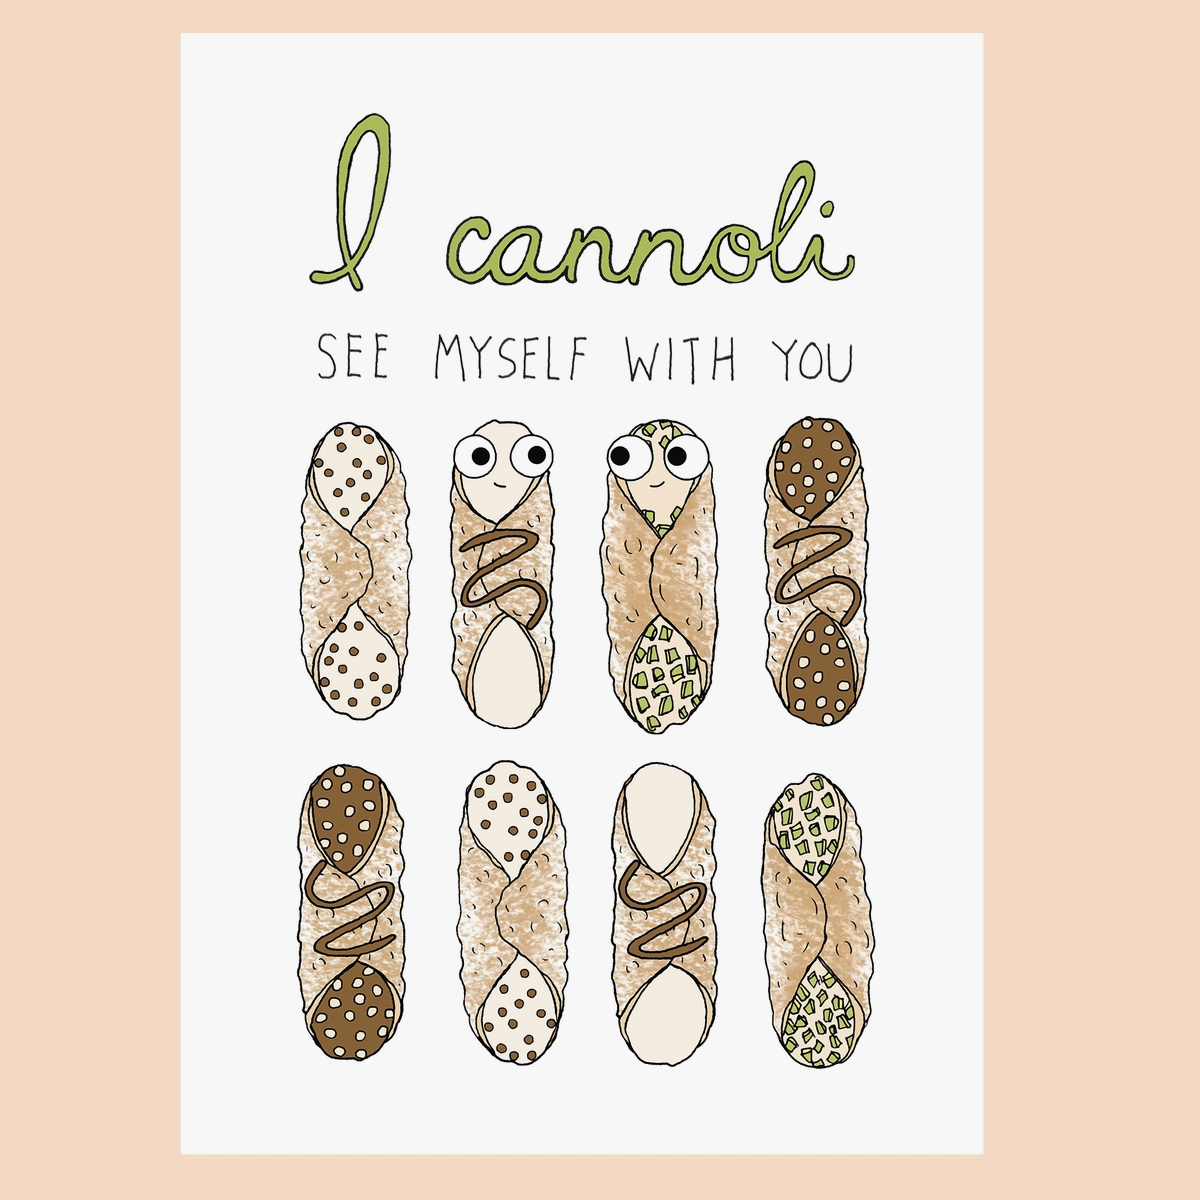 FINEASSLINES | Cannoli See Myself with You | Prelude & Dawn | Los Angeles, CA